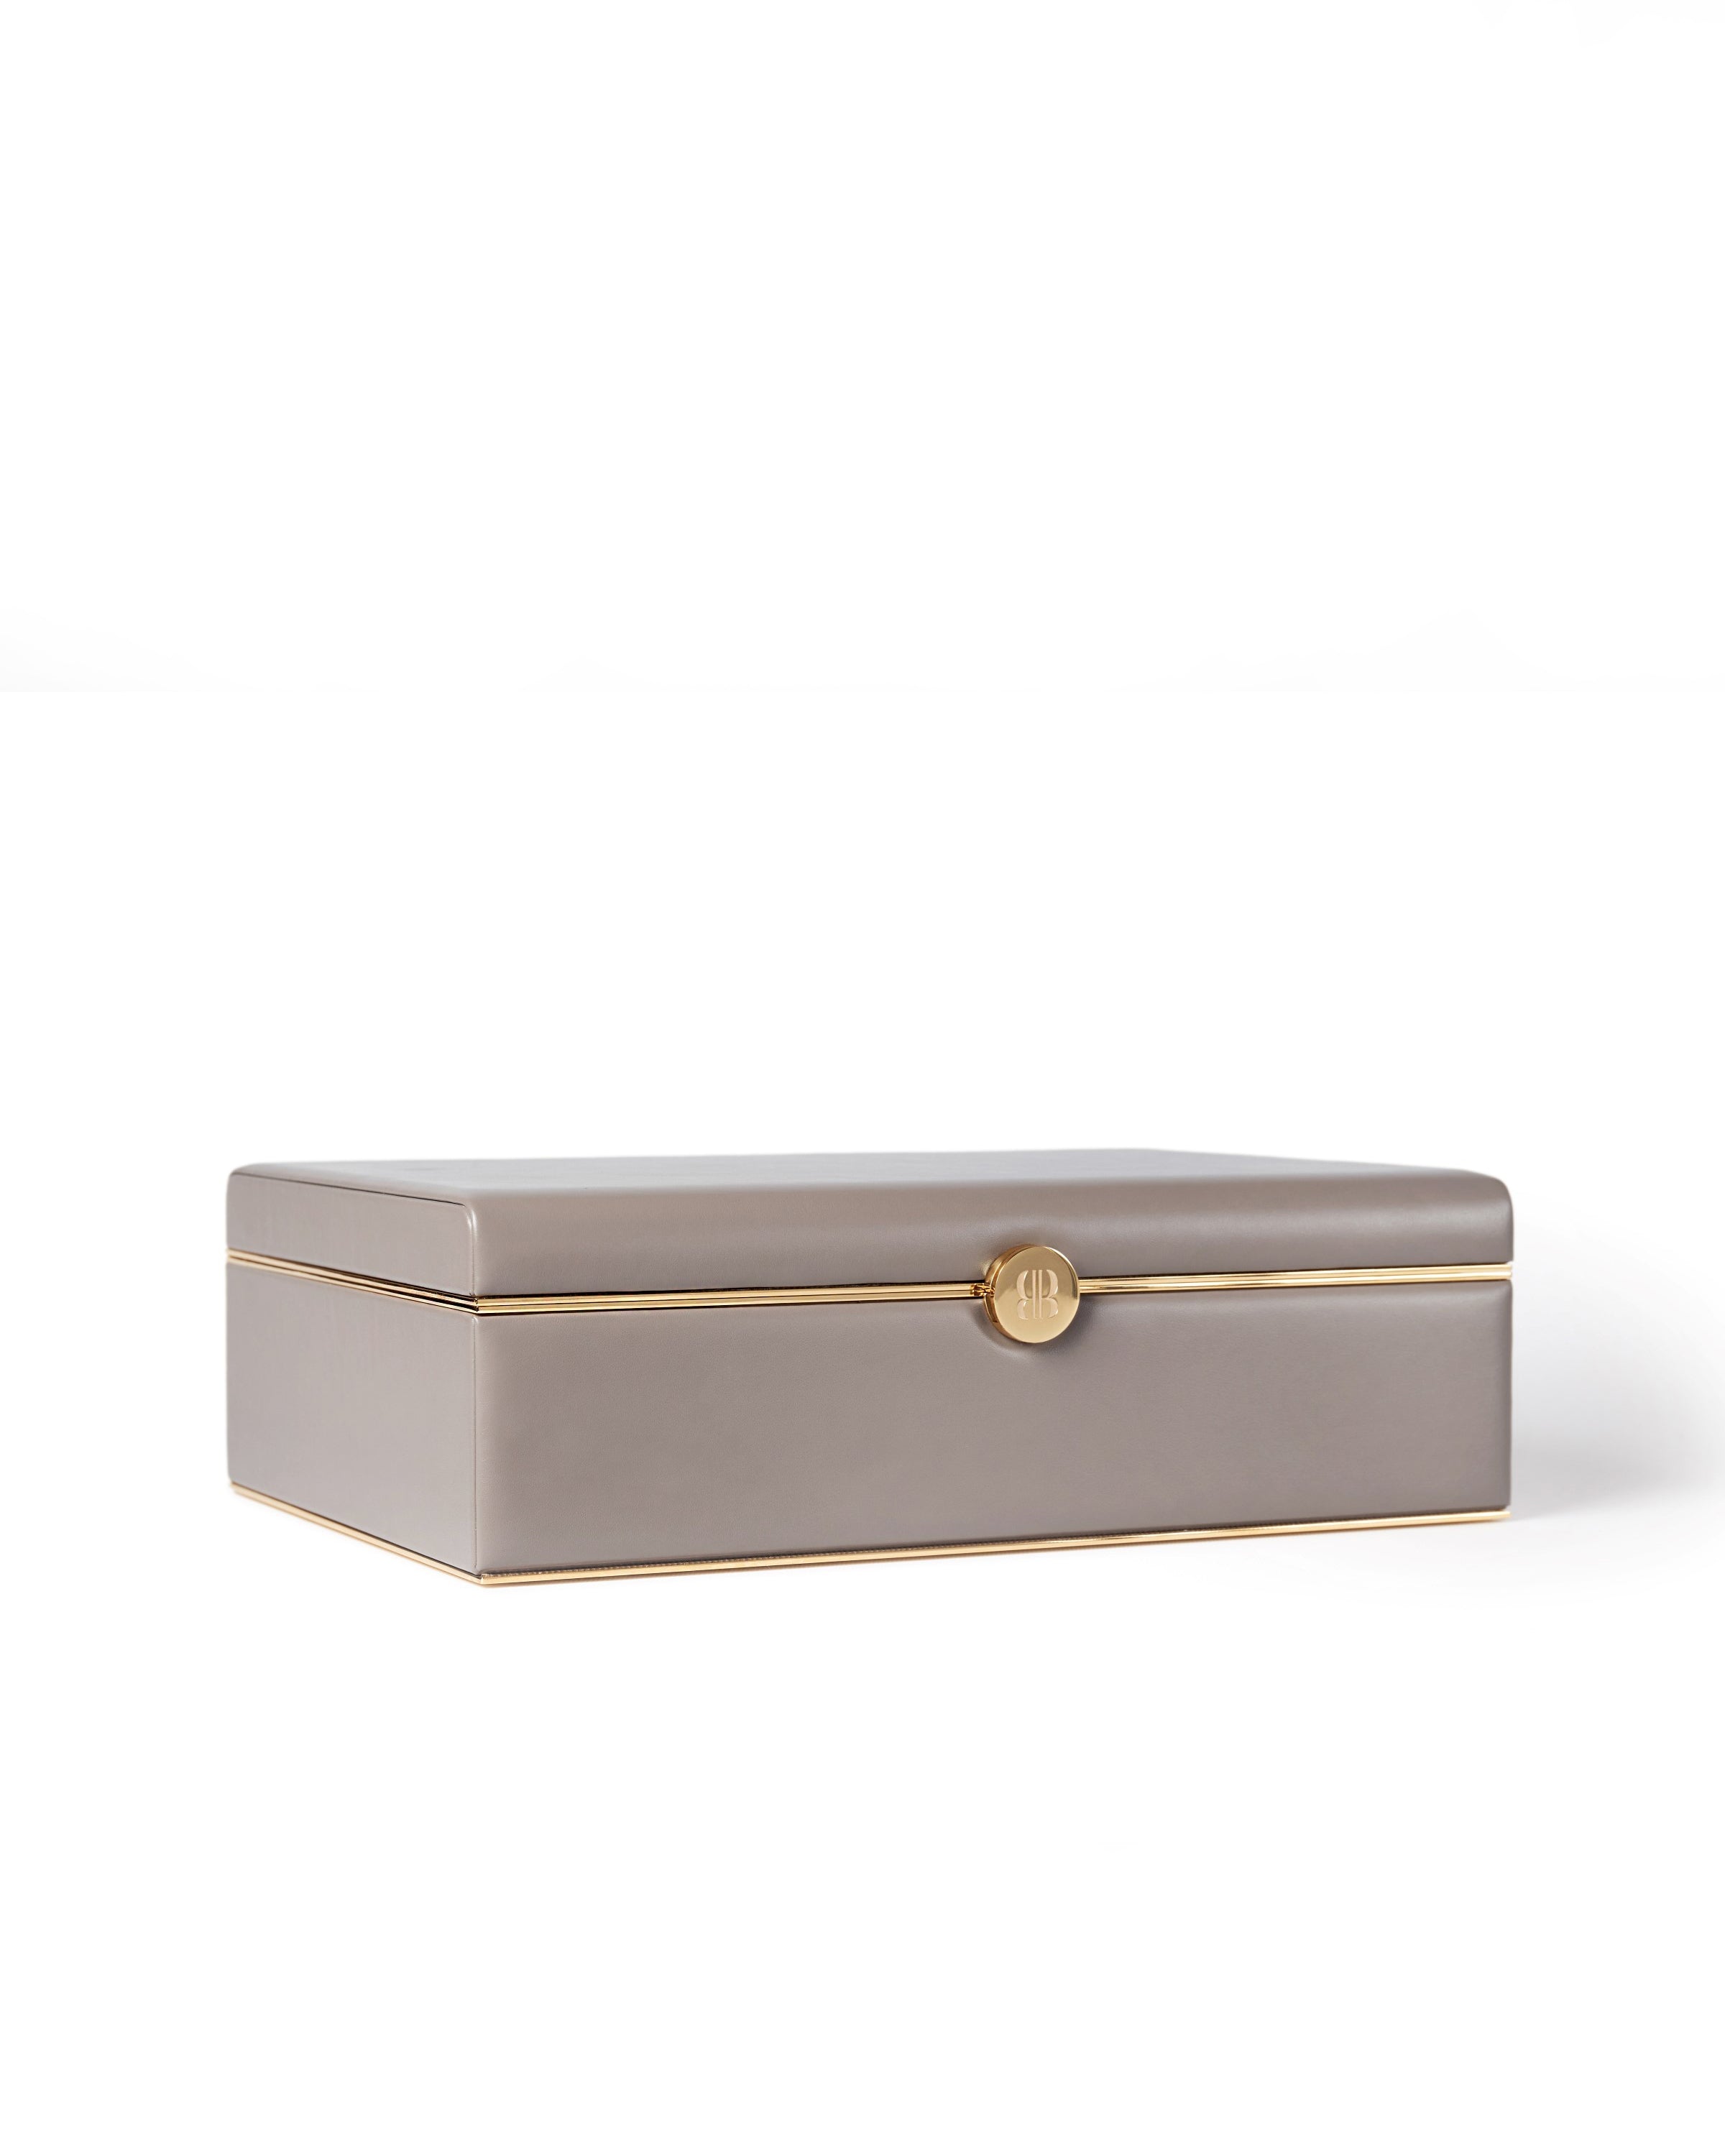 Bernardini Milano jewellery holder of leather, yellow gold plated and silk - closed